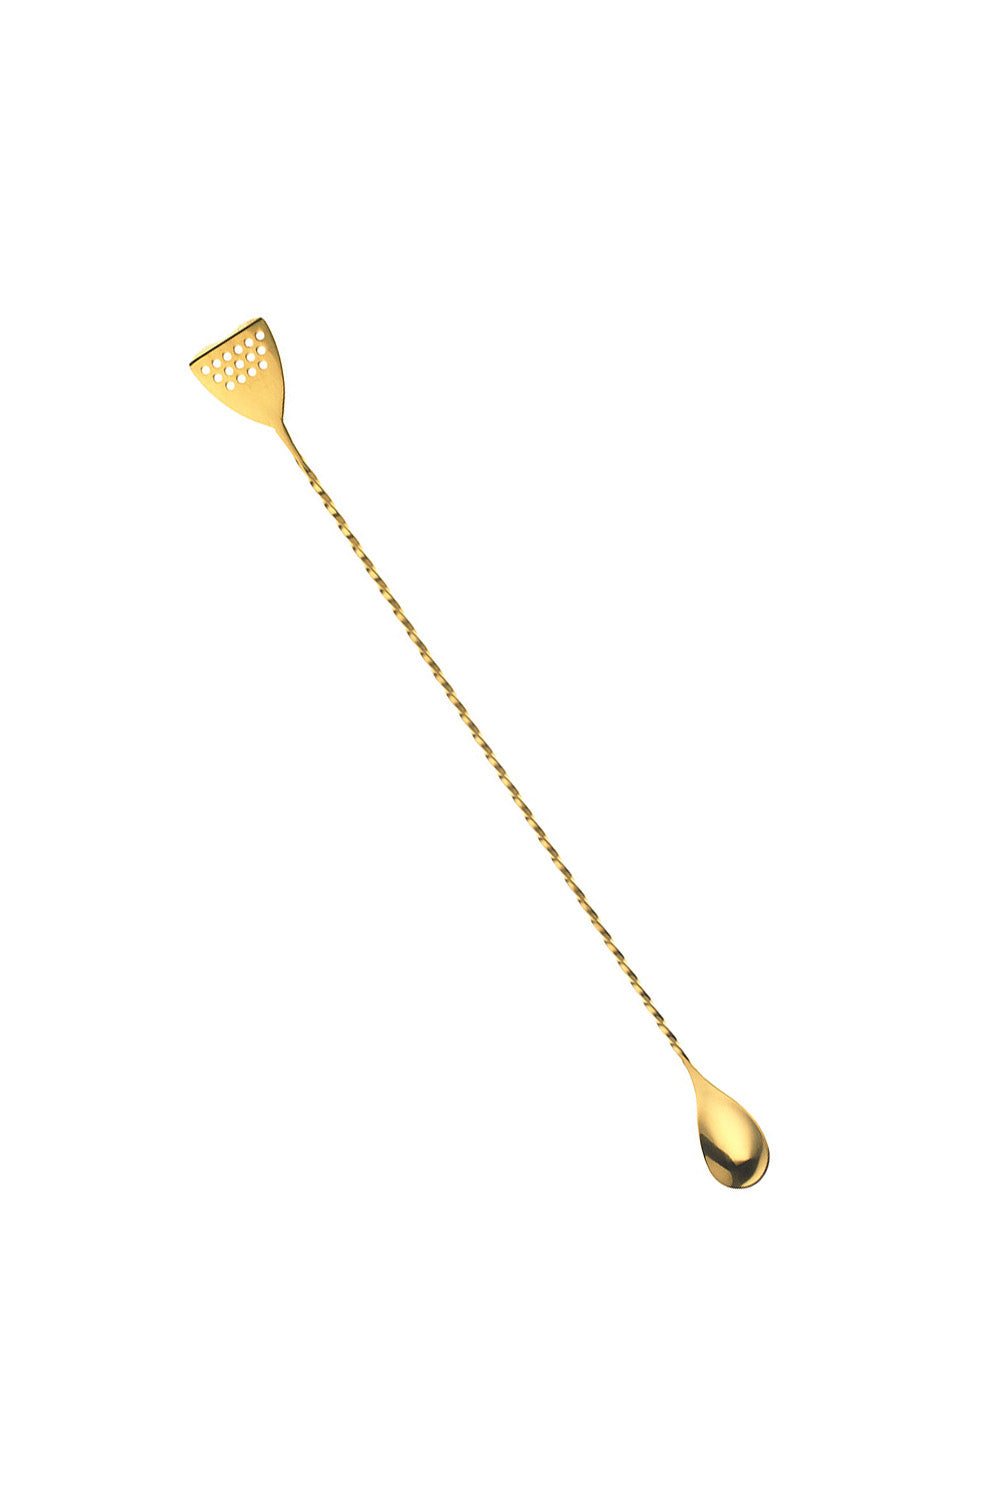 Barfly Spoon with Strainer - Gold